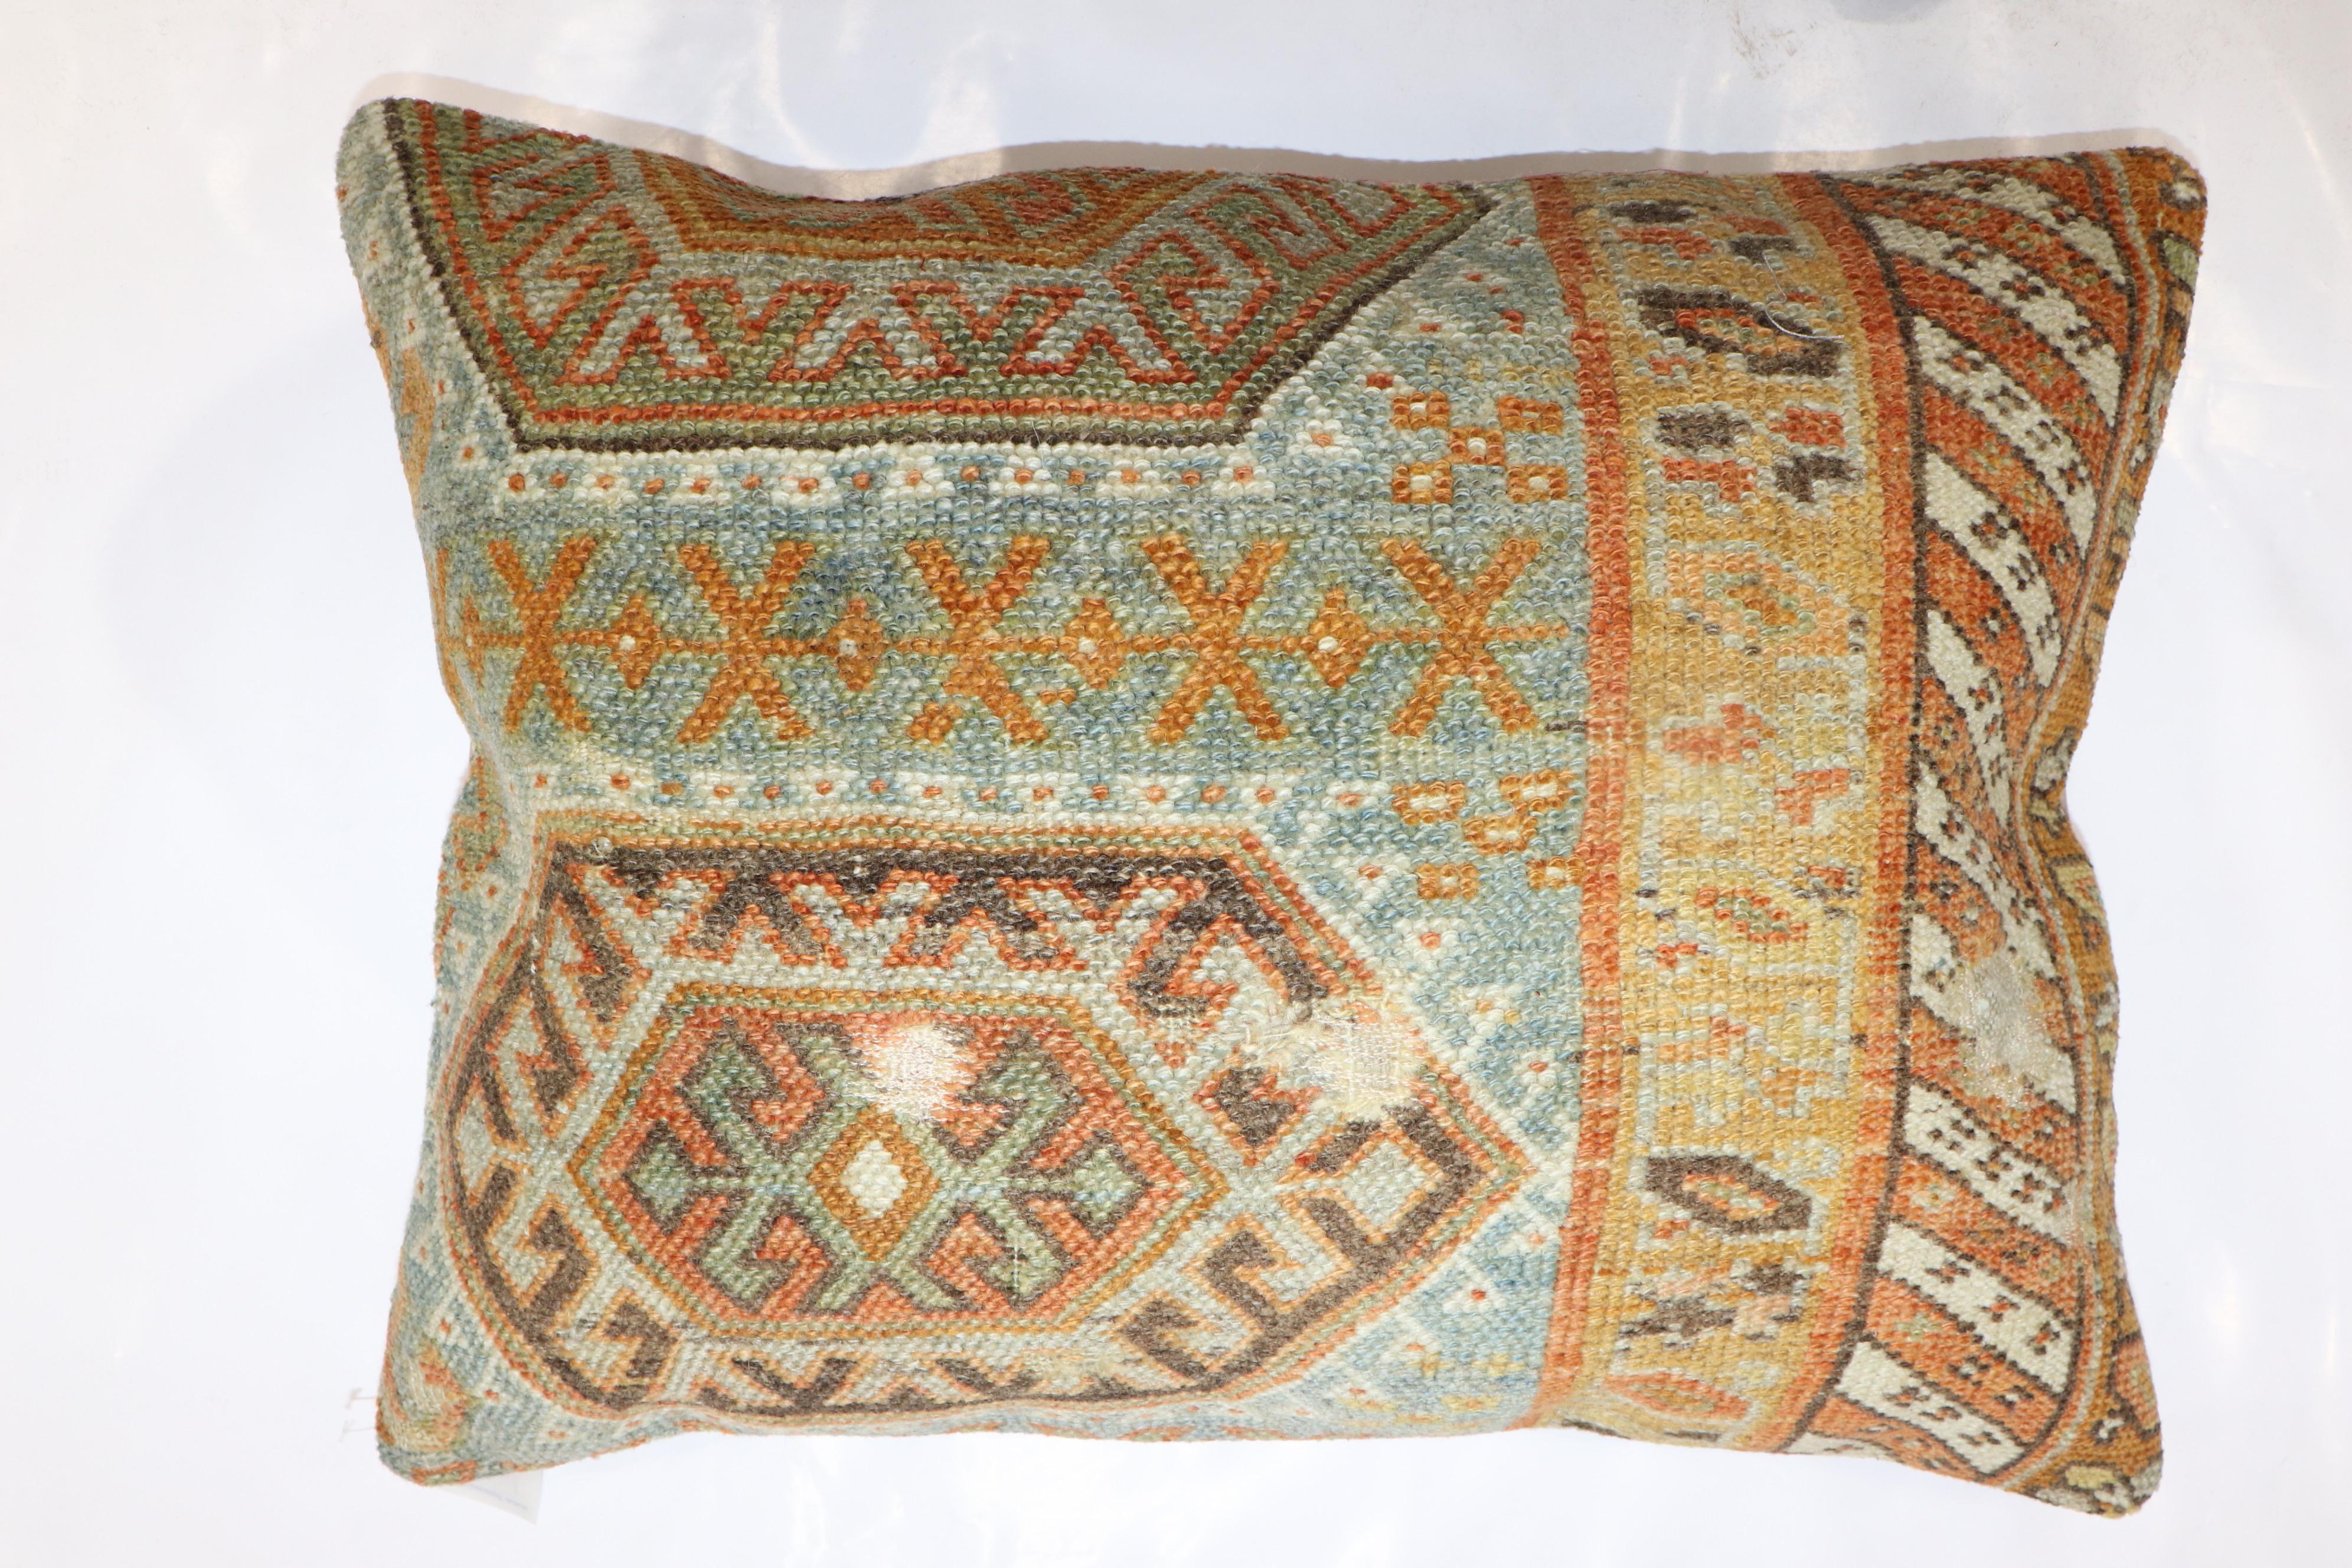 Large-size pillow made from a Persian Kurd rug. zipper closure and poly-fill insert provided.

Measures: 18'' x 23''.